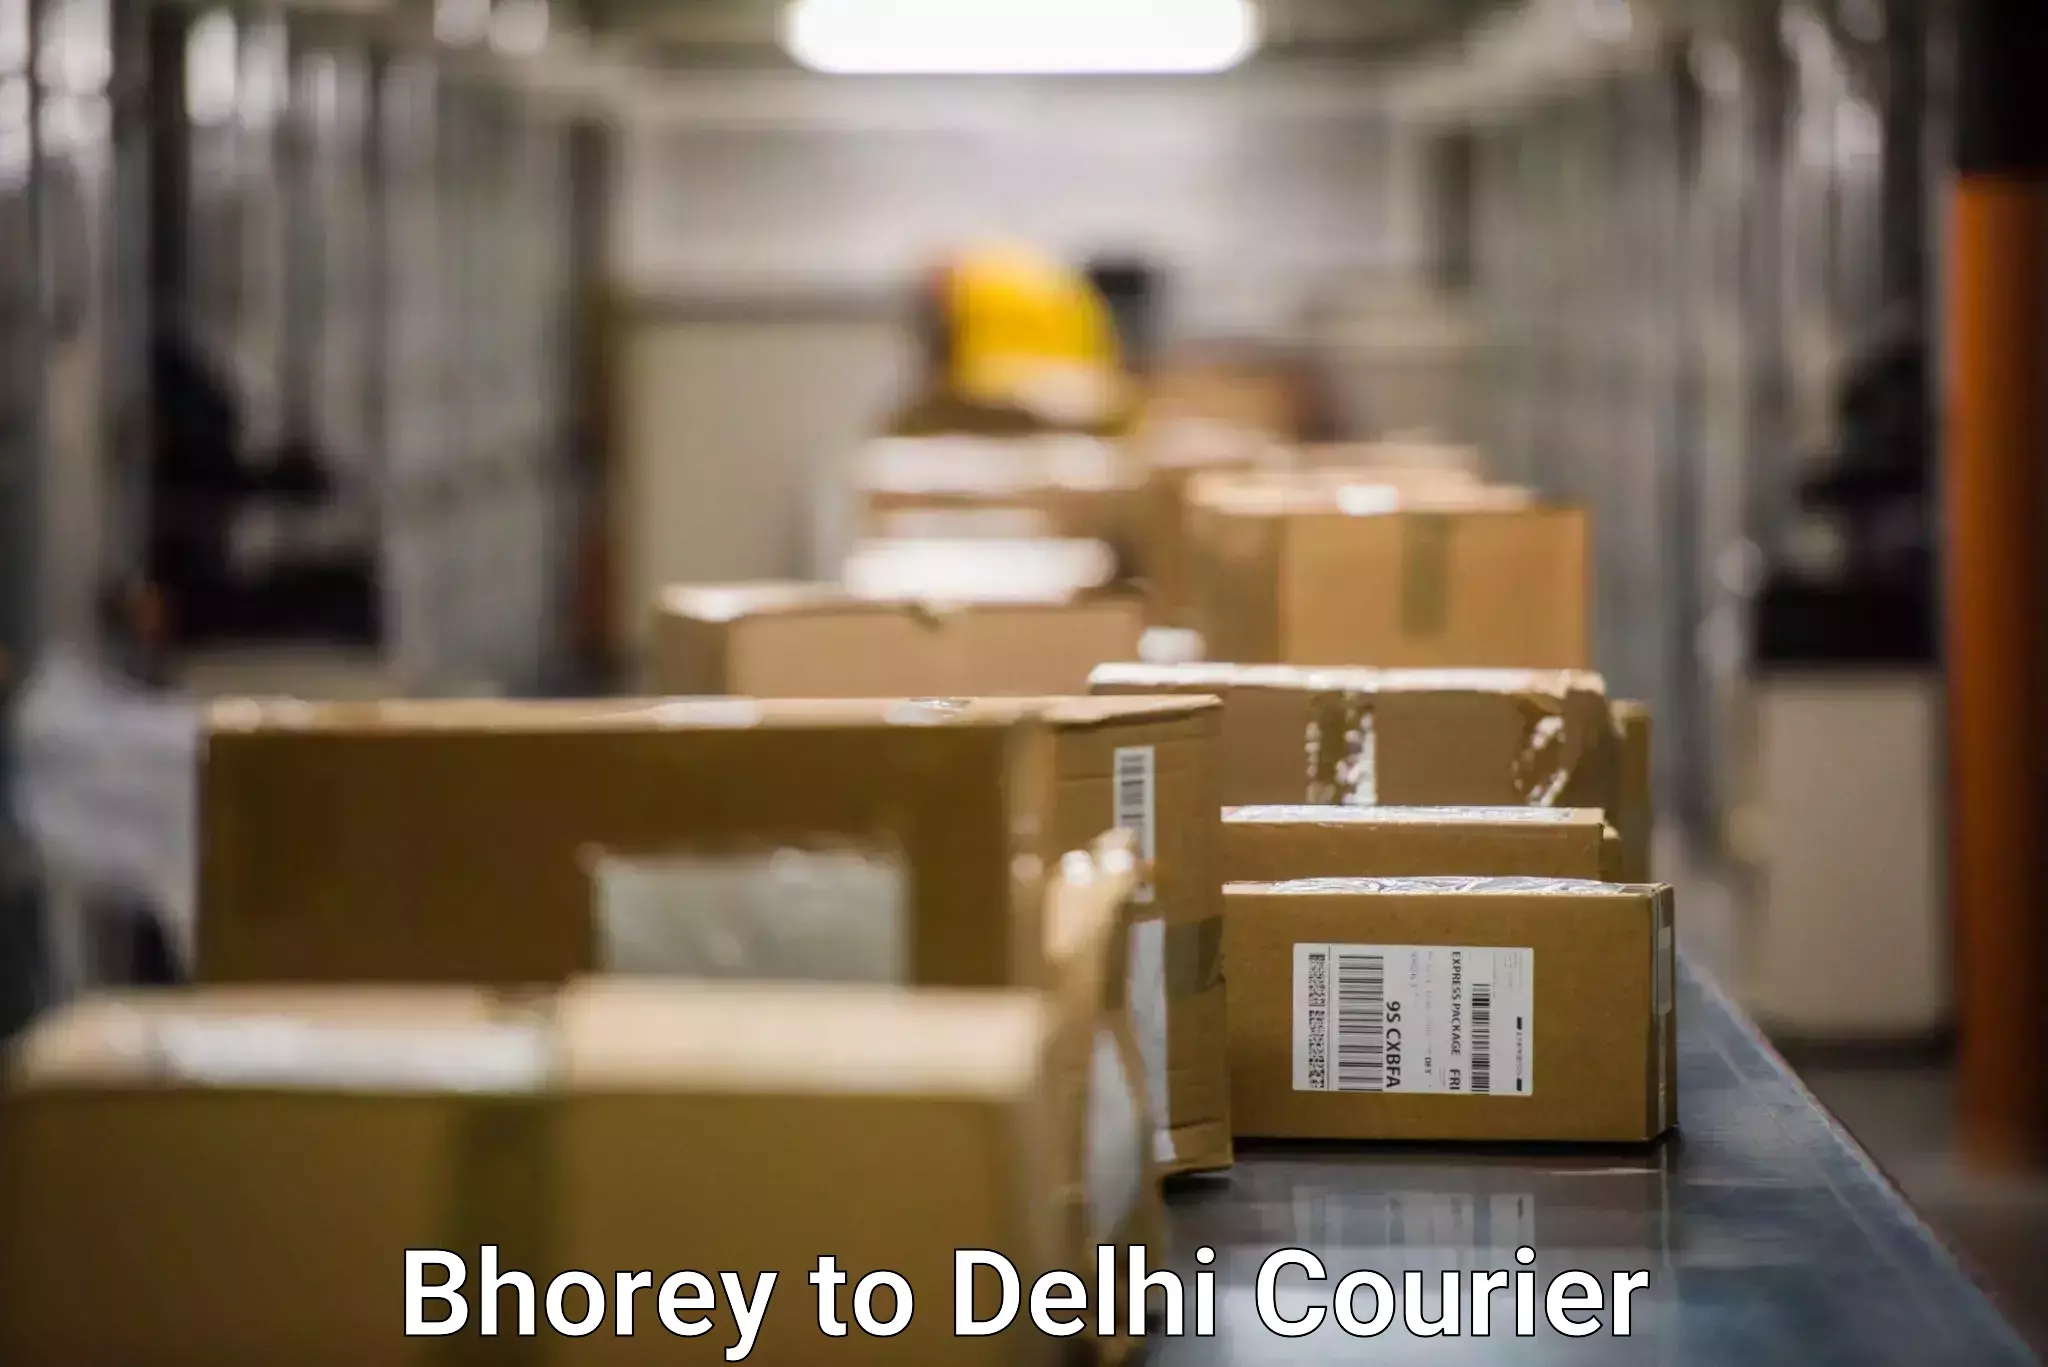 Nationwide shipping capabilities in Bhorey to Lodhi Road